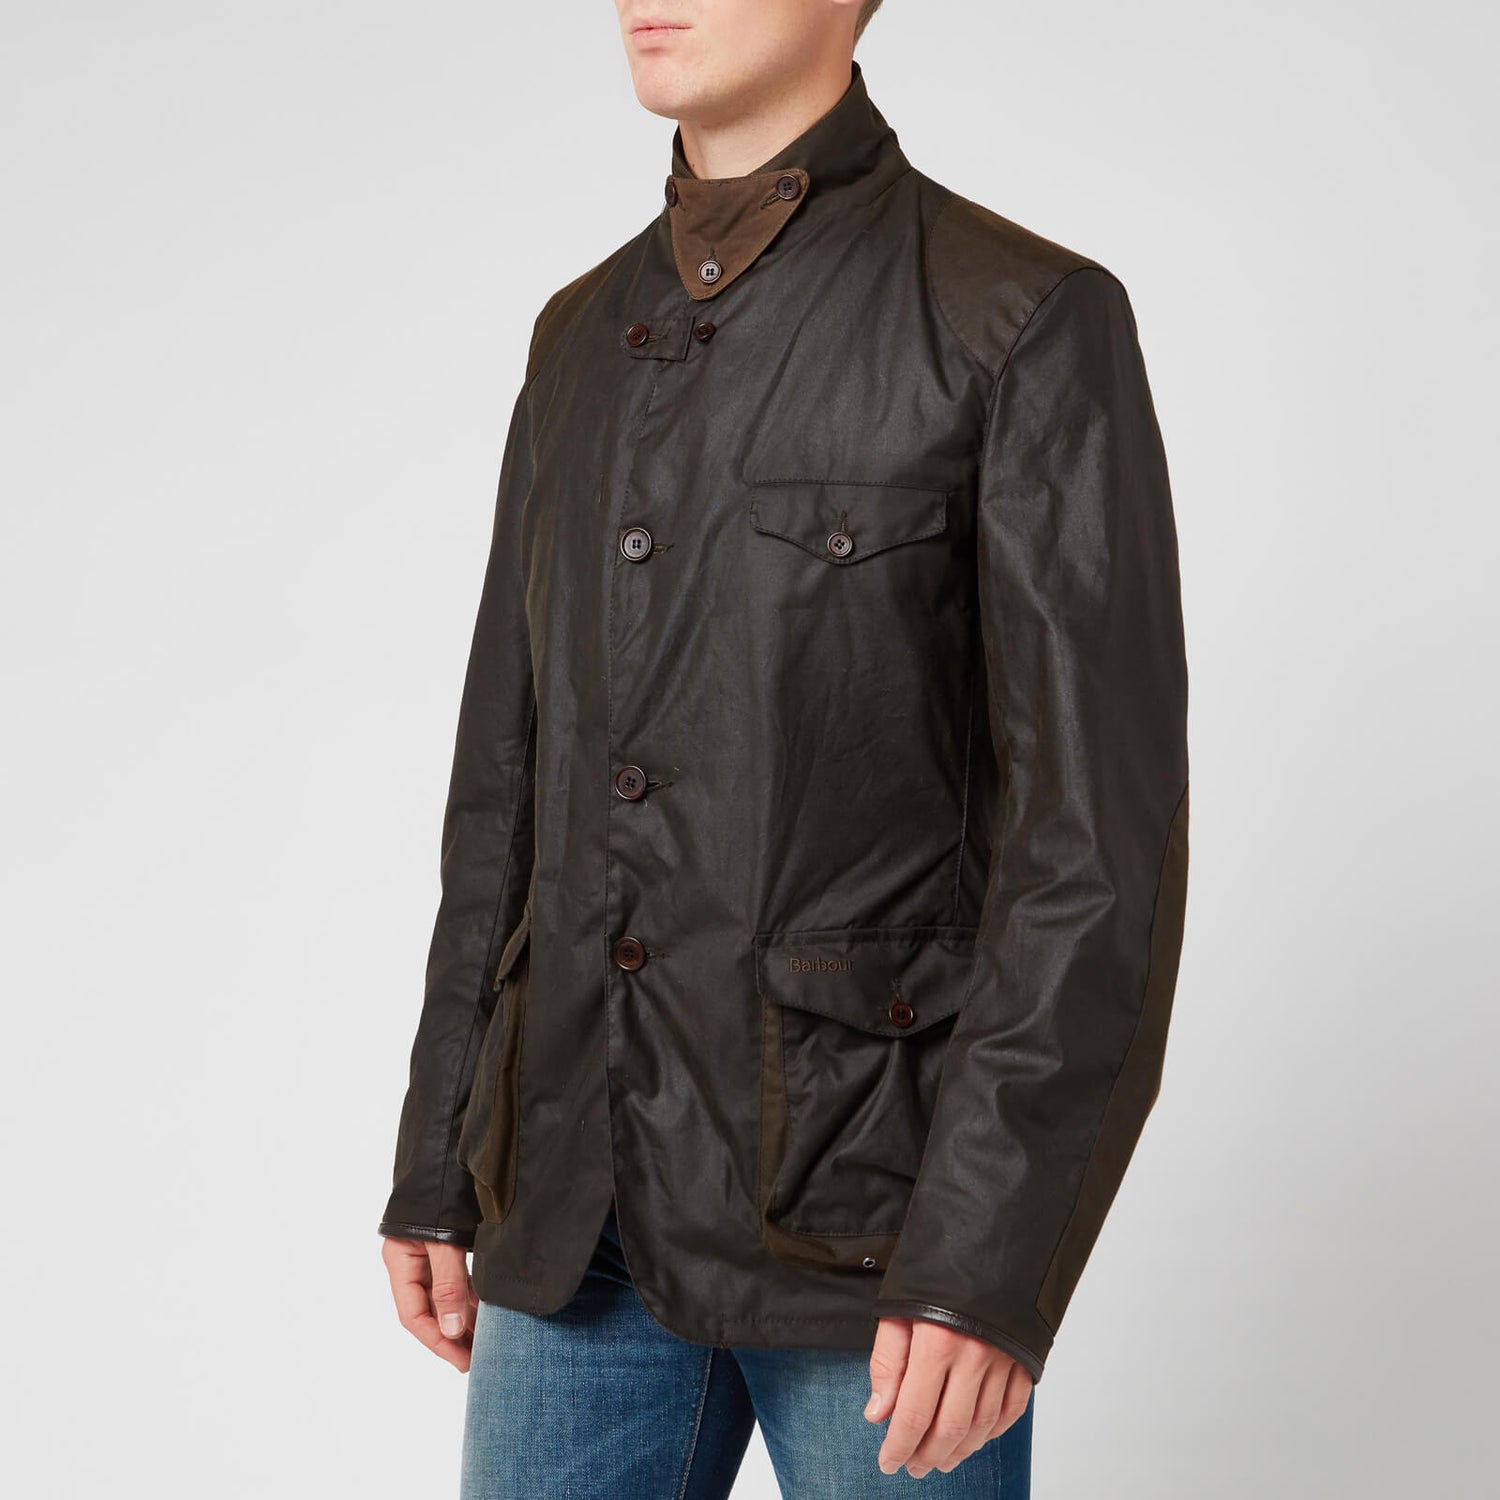 Barbour Men's Beacon Sports Jacket - Olive - Free UK Delivery Available